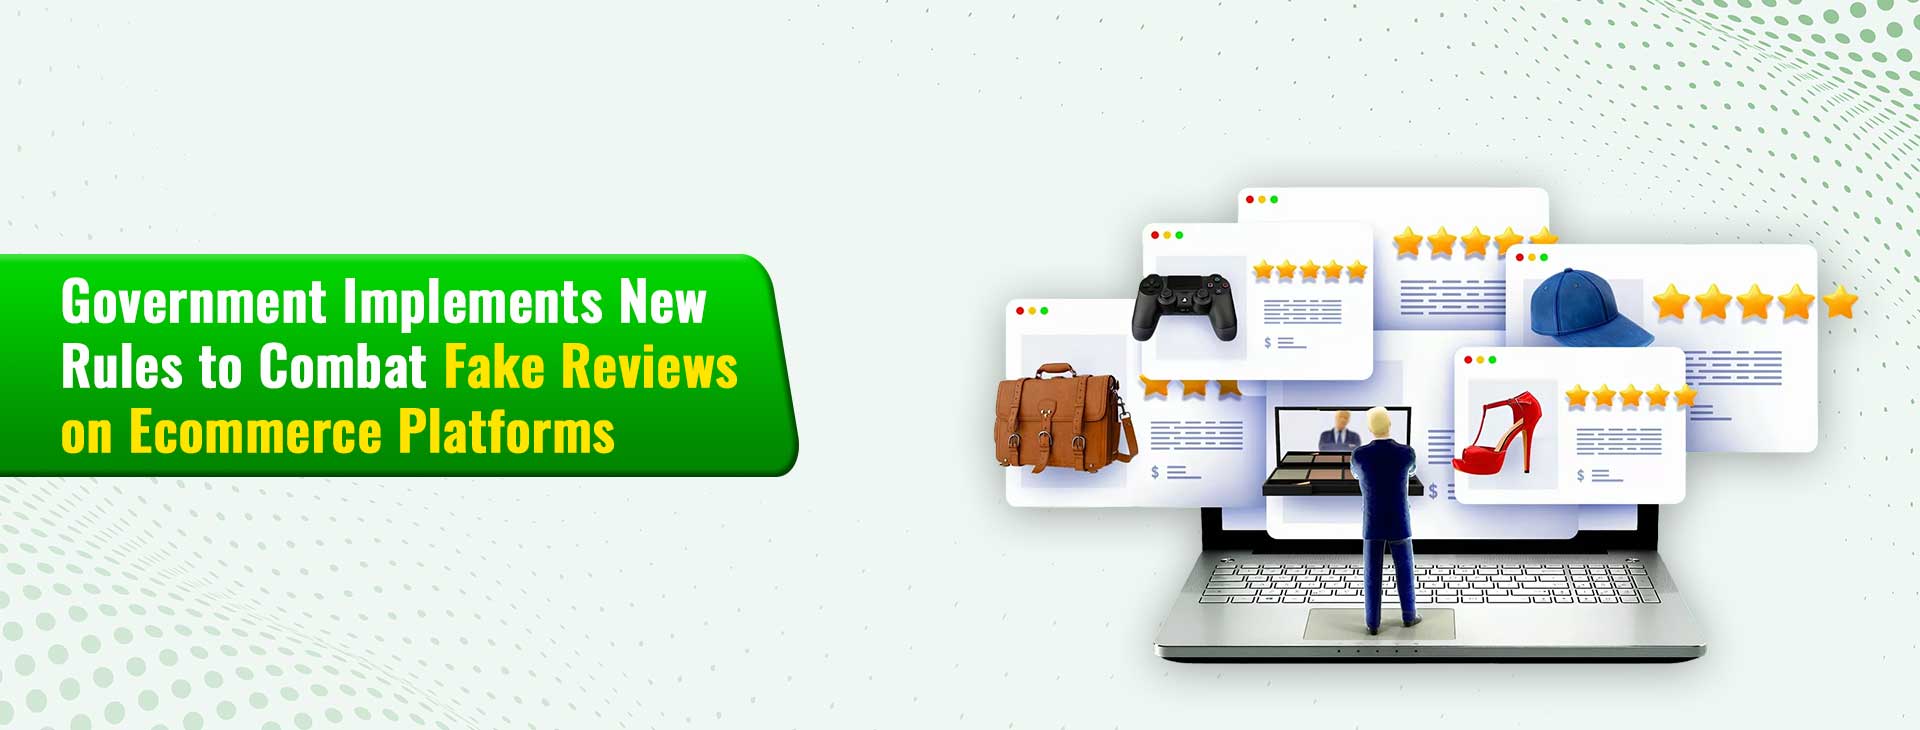 Government Implements New Rules to Combat Fake Reviews on Ecommerce Platforms